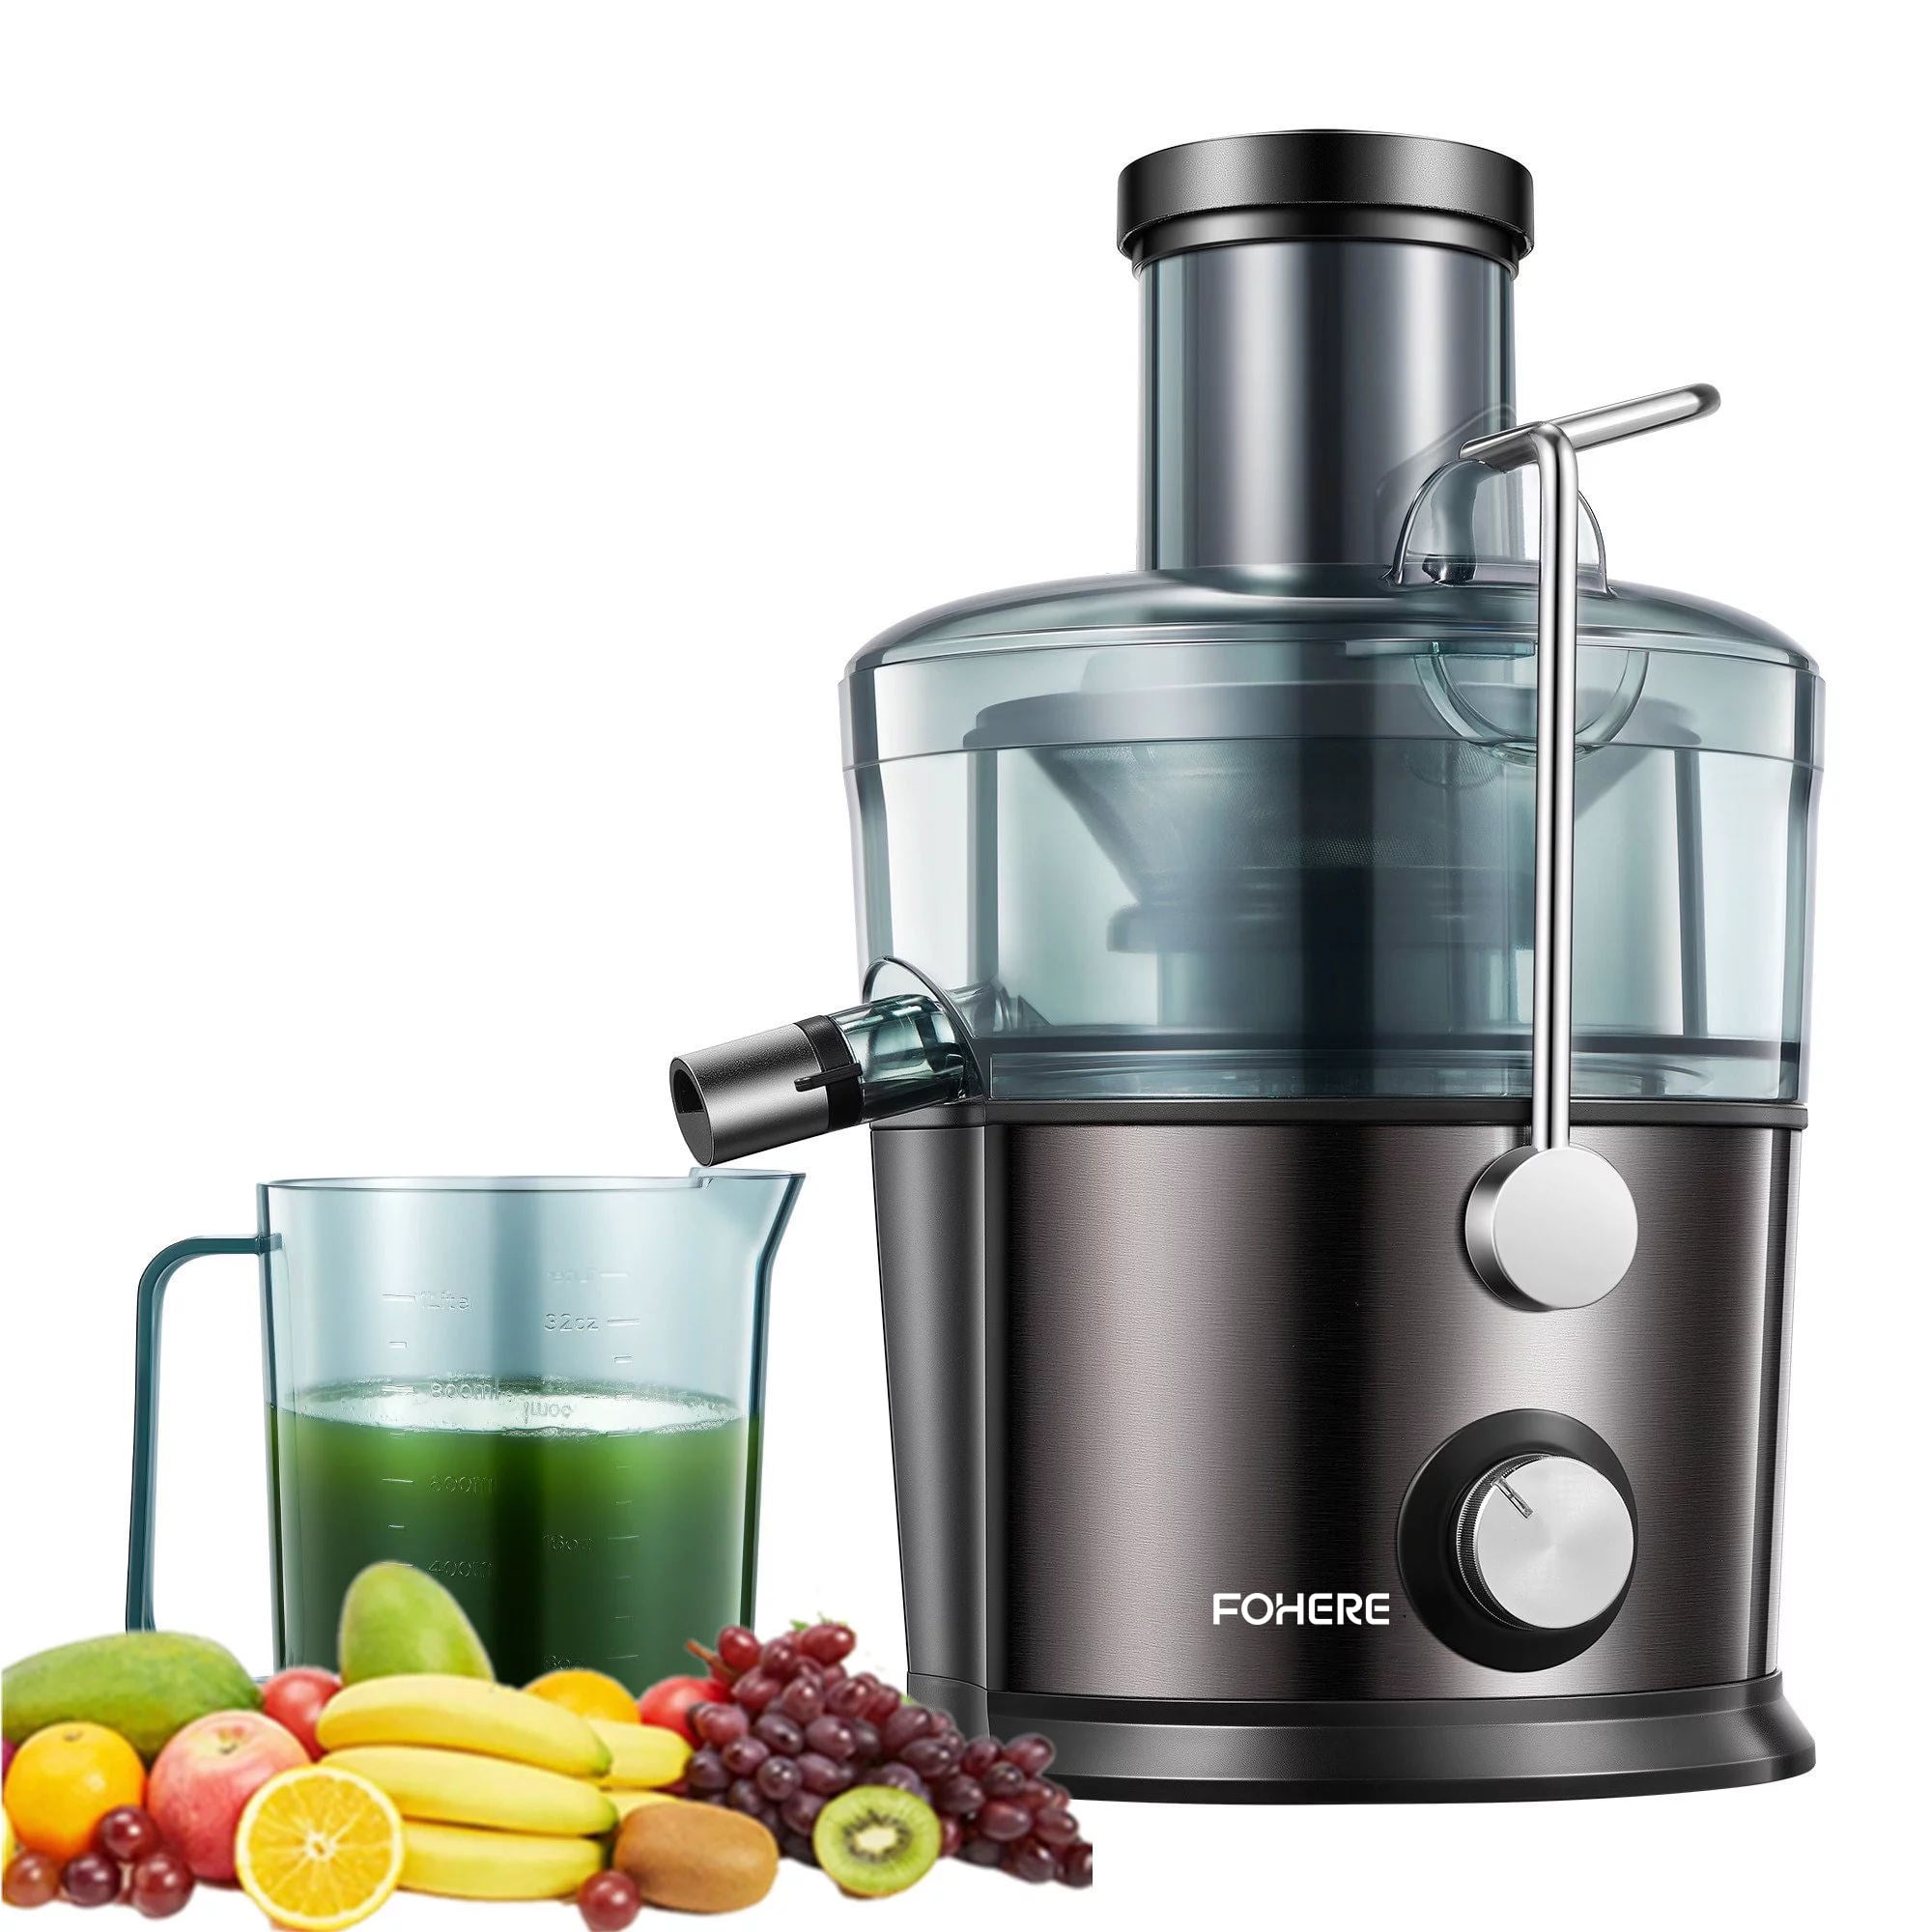 Dropship 1000W Centrifugal Juicer Juice Extractor With 2 Speeds